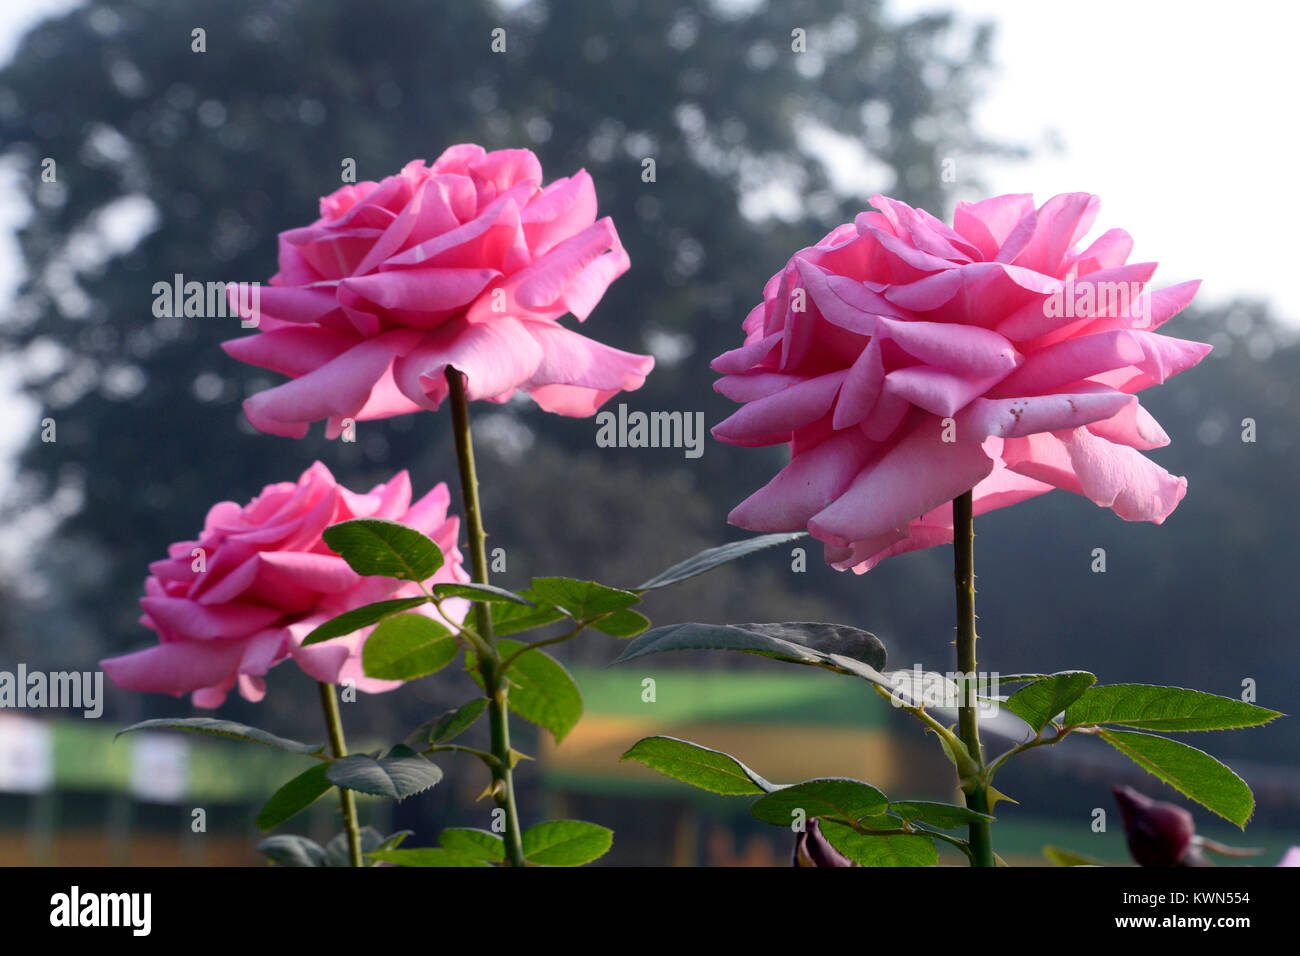 Kolkata, India. 04th Jan, 2018. Rose displayed at Winter Flower Show 2018  in Agri-Horticulture Society of India, Kolkata. Agri-Horticulture Society  of India (AHSI) organized Winter Flower Show 2018 at their garden on